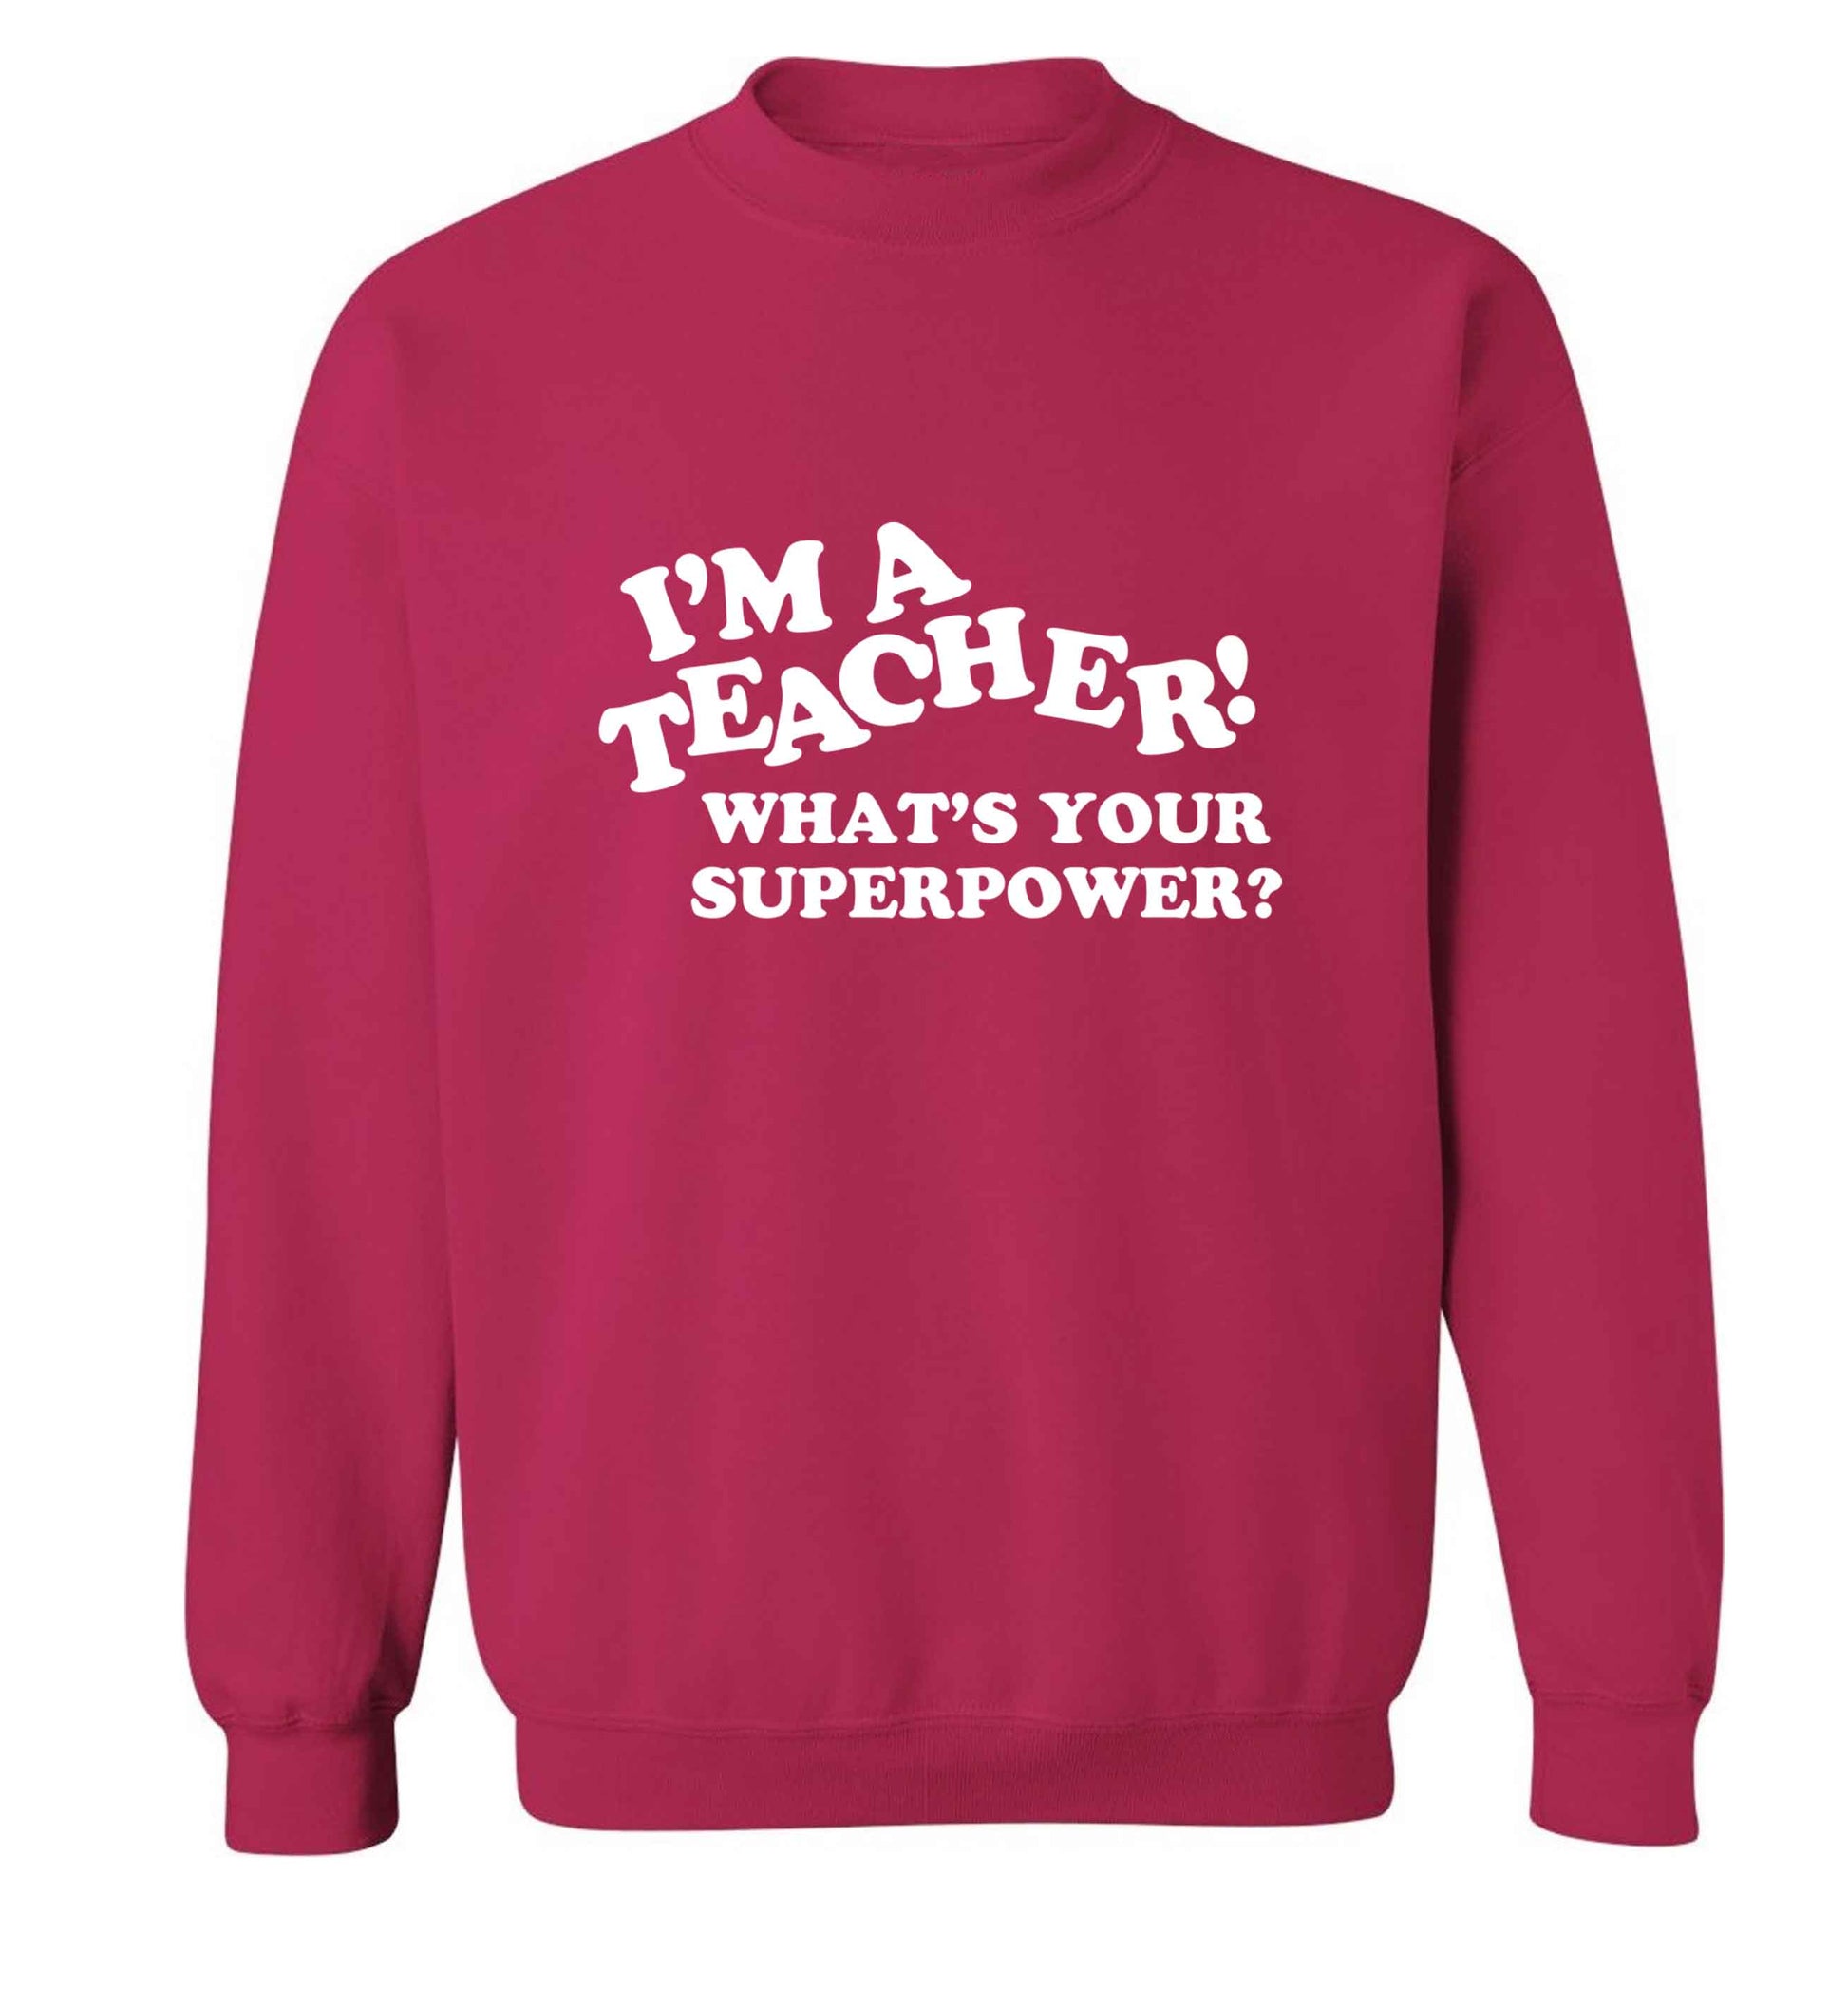 I'm a teacher what's your superpower?! adult's unisex pink sweater 2XL